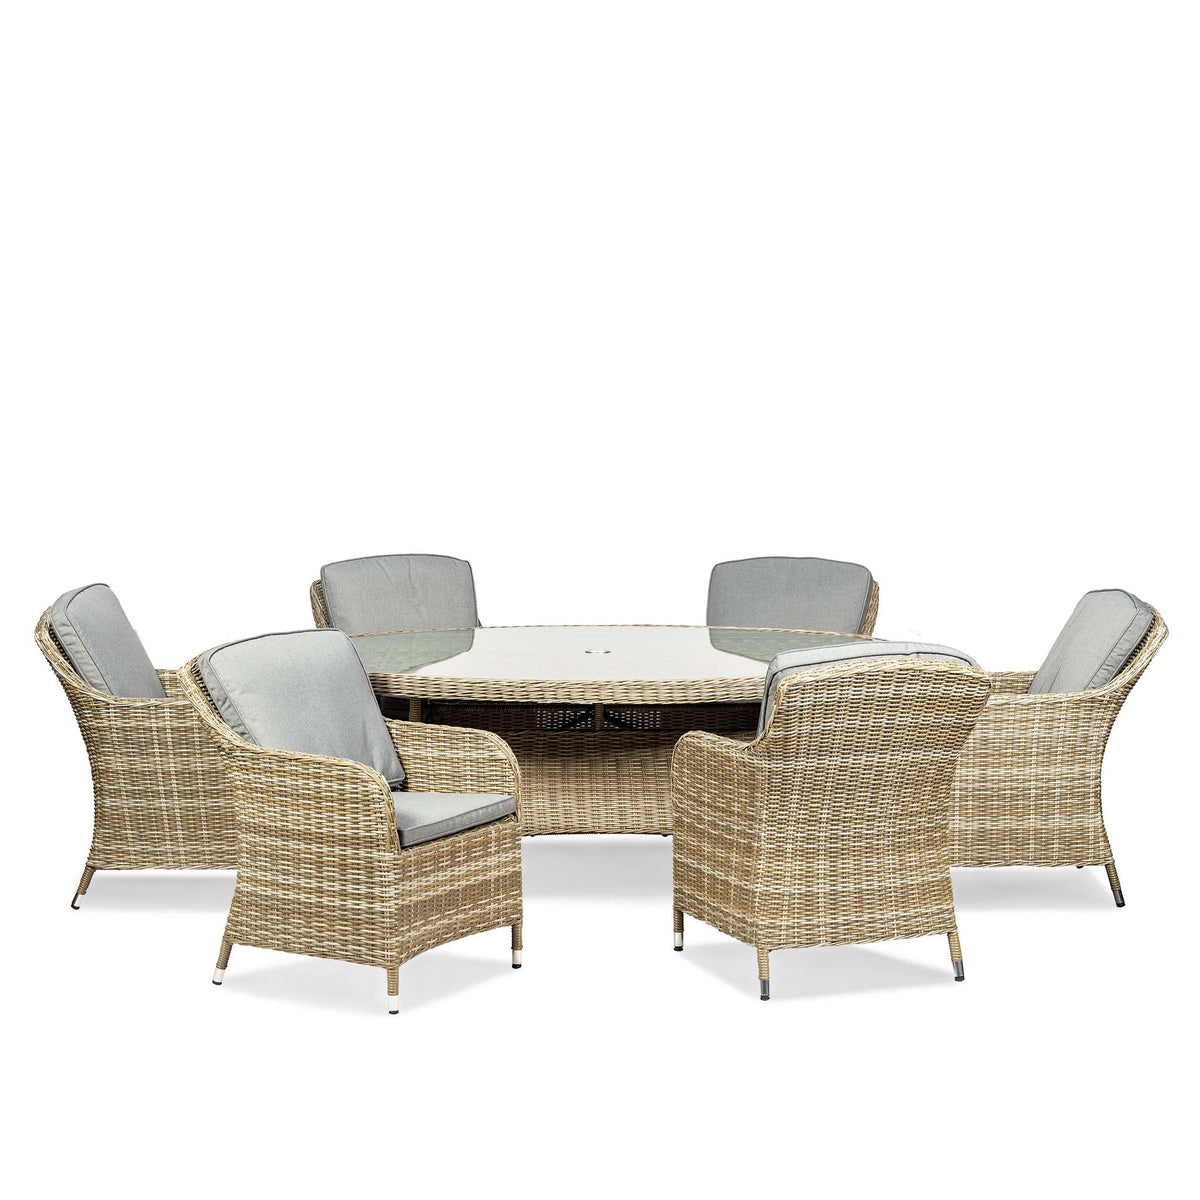 Wentworth 6 Seat 200cm Ellipse Deluxe Rattan Garden Dining Set from Roseland Home Furniture